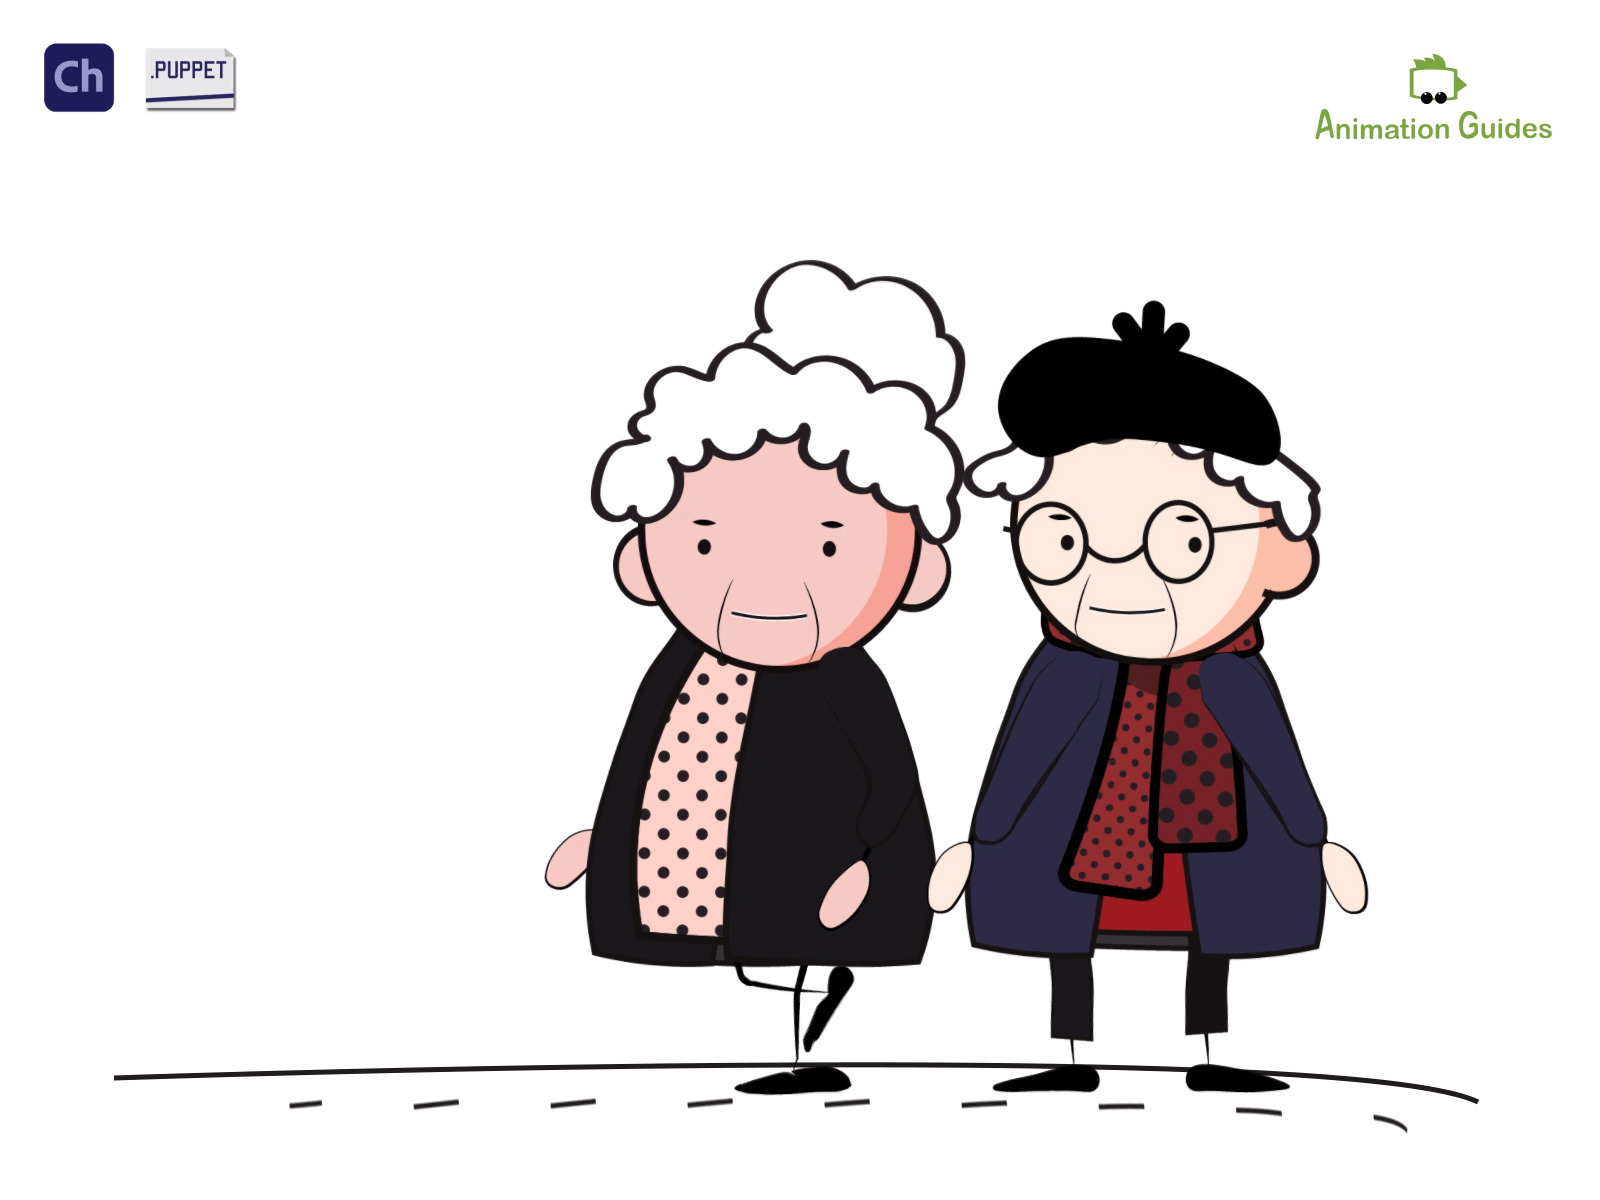 Wherever you go, there you are... adobe character animator animated animation cartoon character character animator character design download grandma illustration old woman puppet stick figure vector walk women